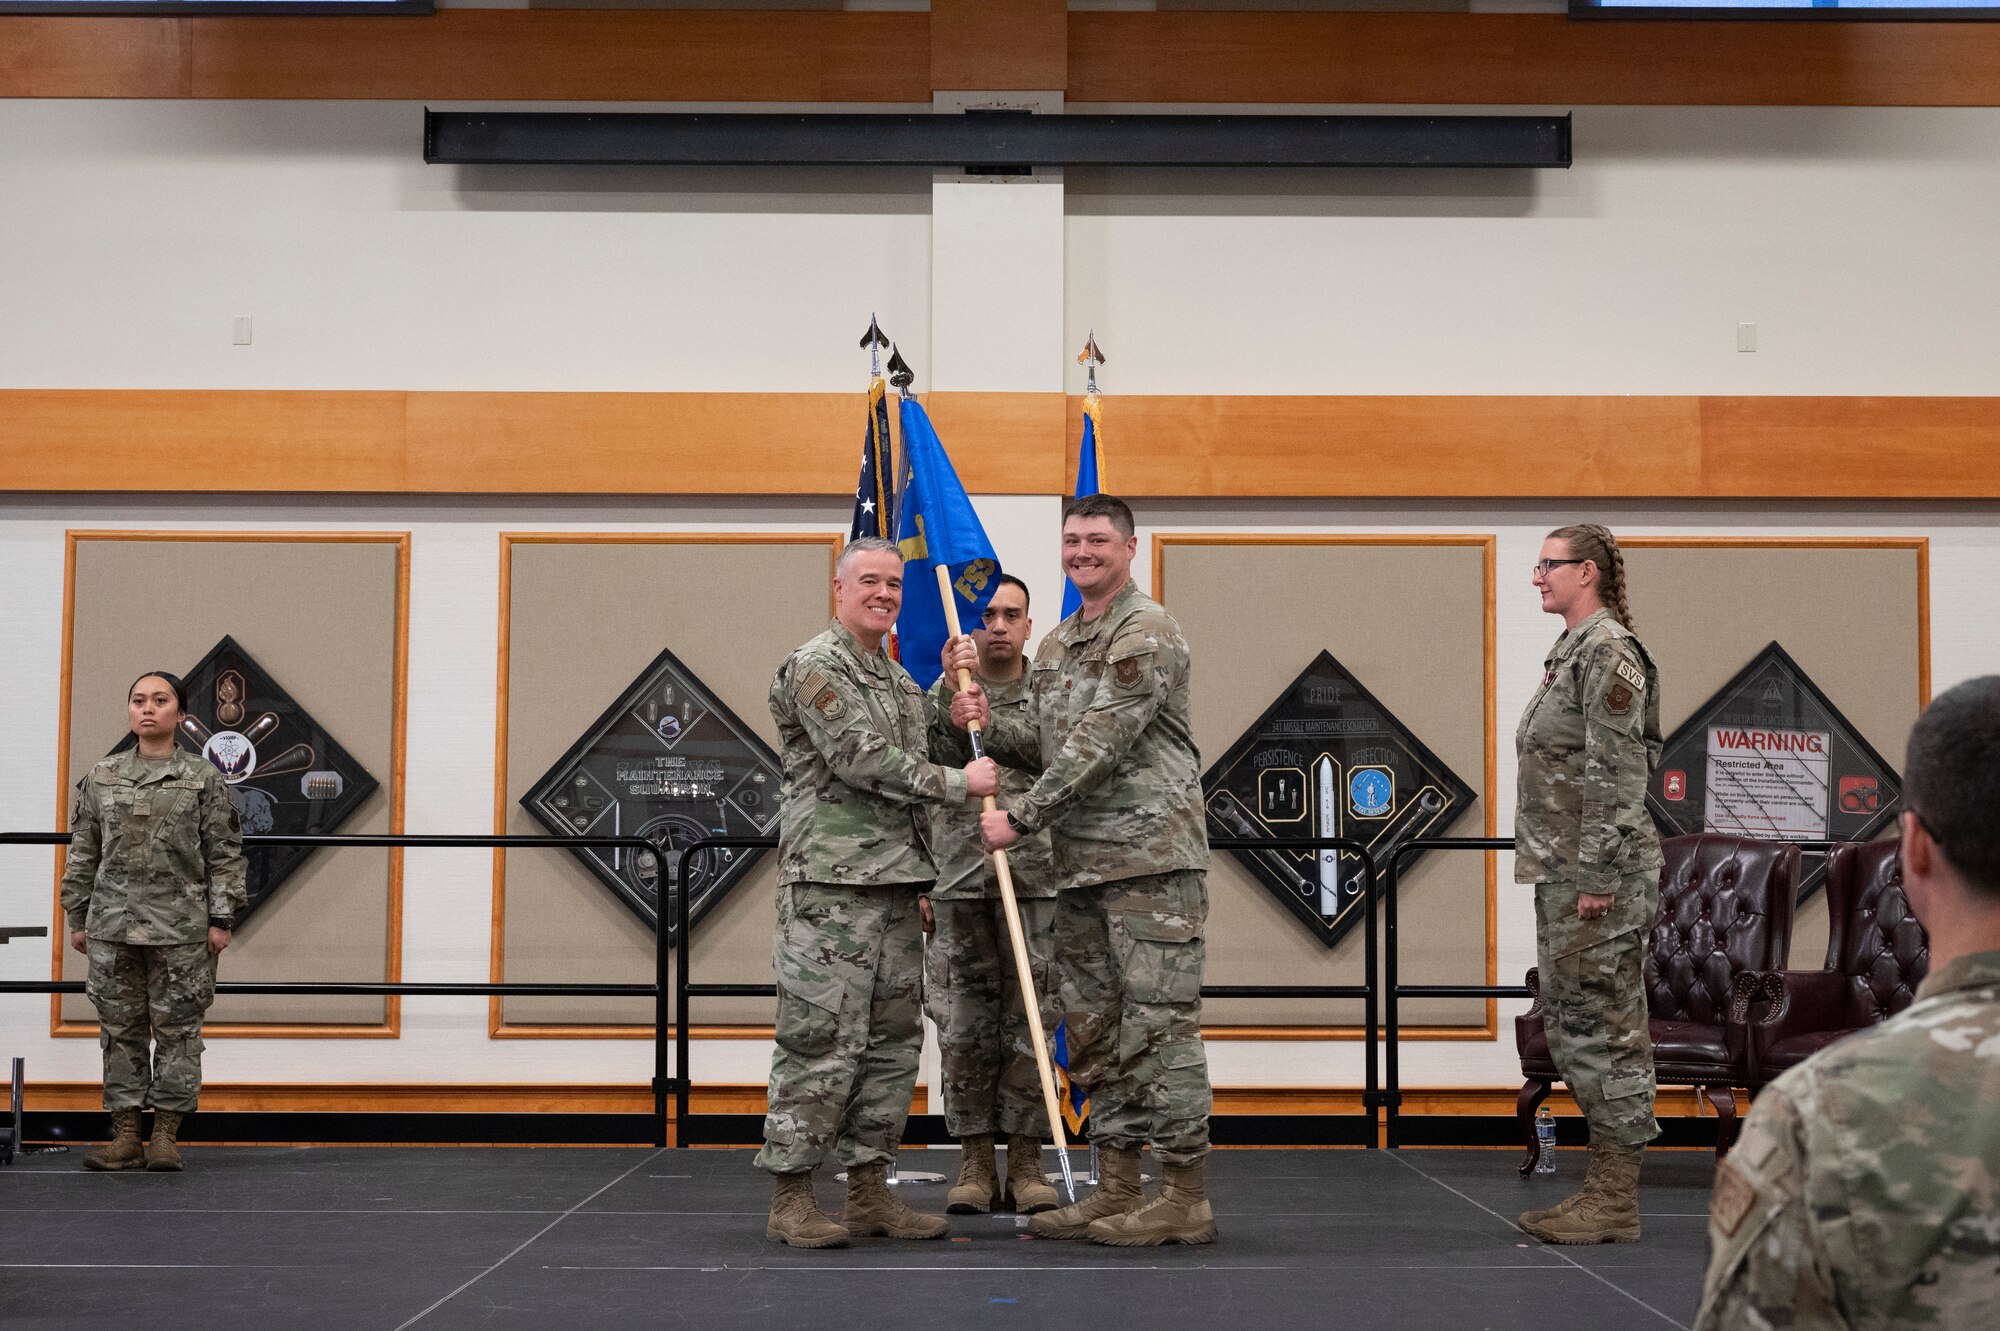 Three military personnel in uniform conduct the passing of a squadron flag to represent the official changing of command.